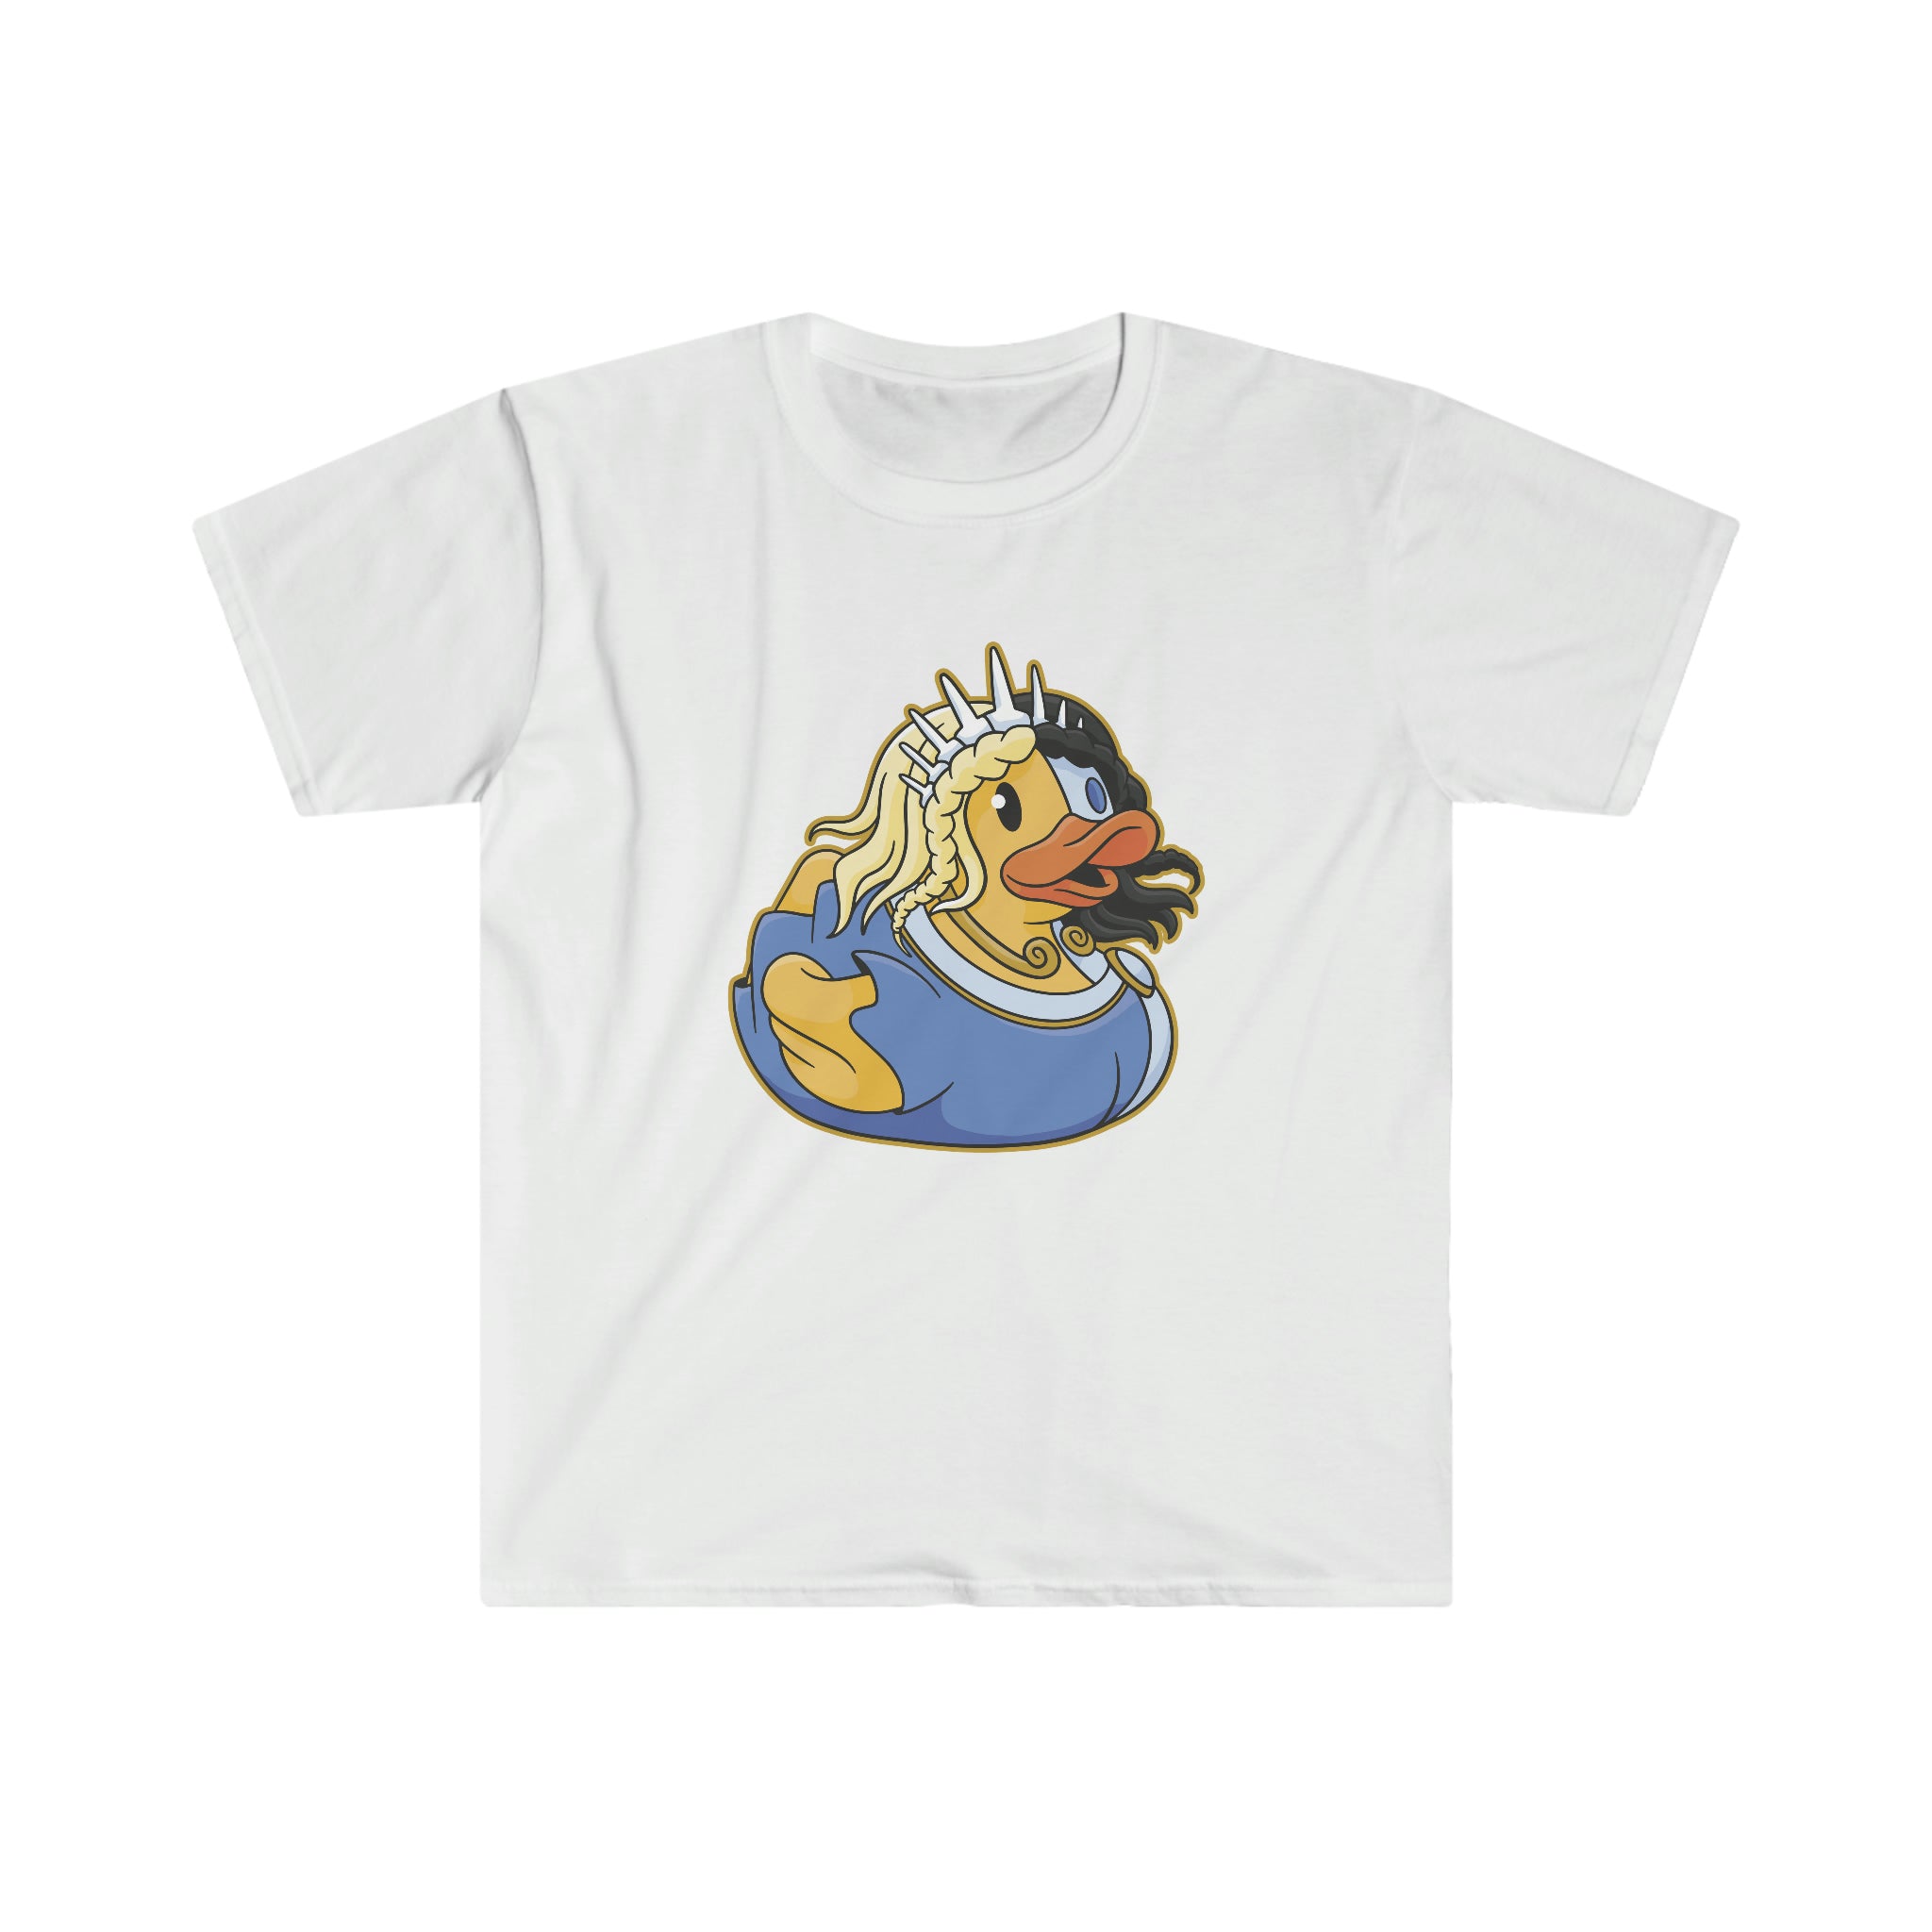 A white Cyber Duck t-shirt with an image of a duck wearing a crown.